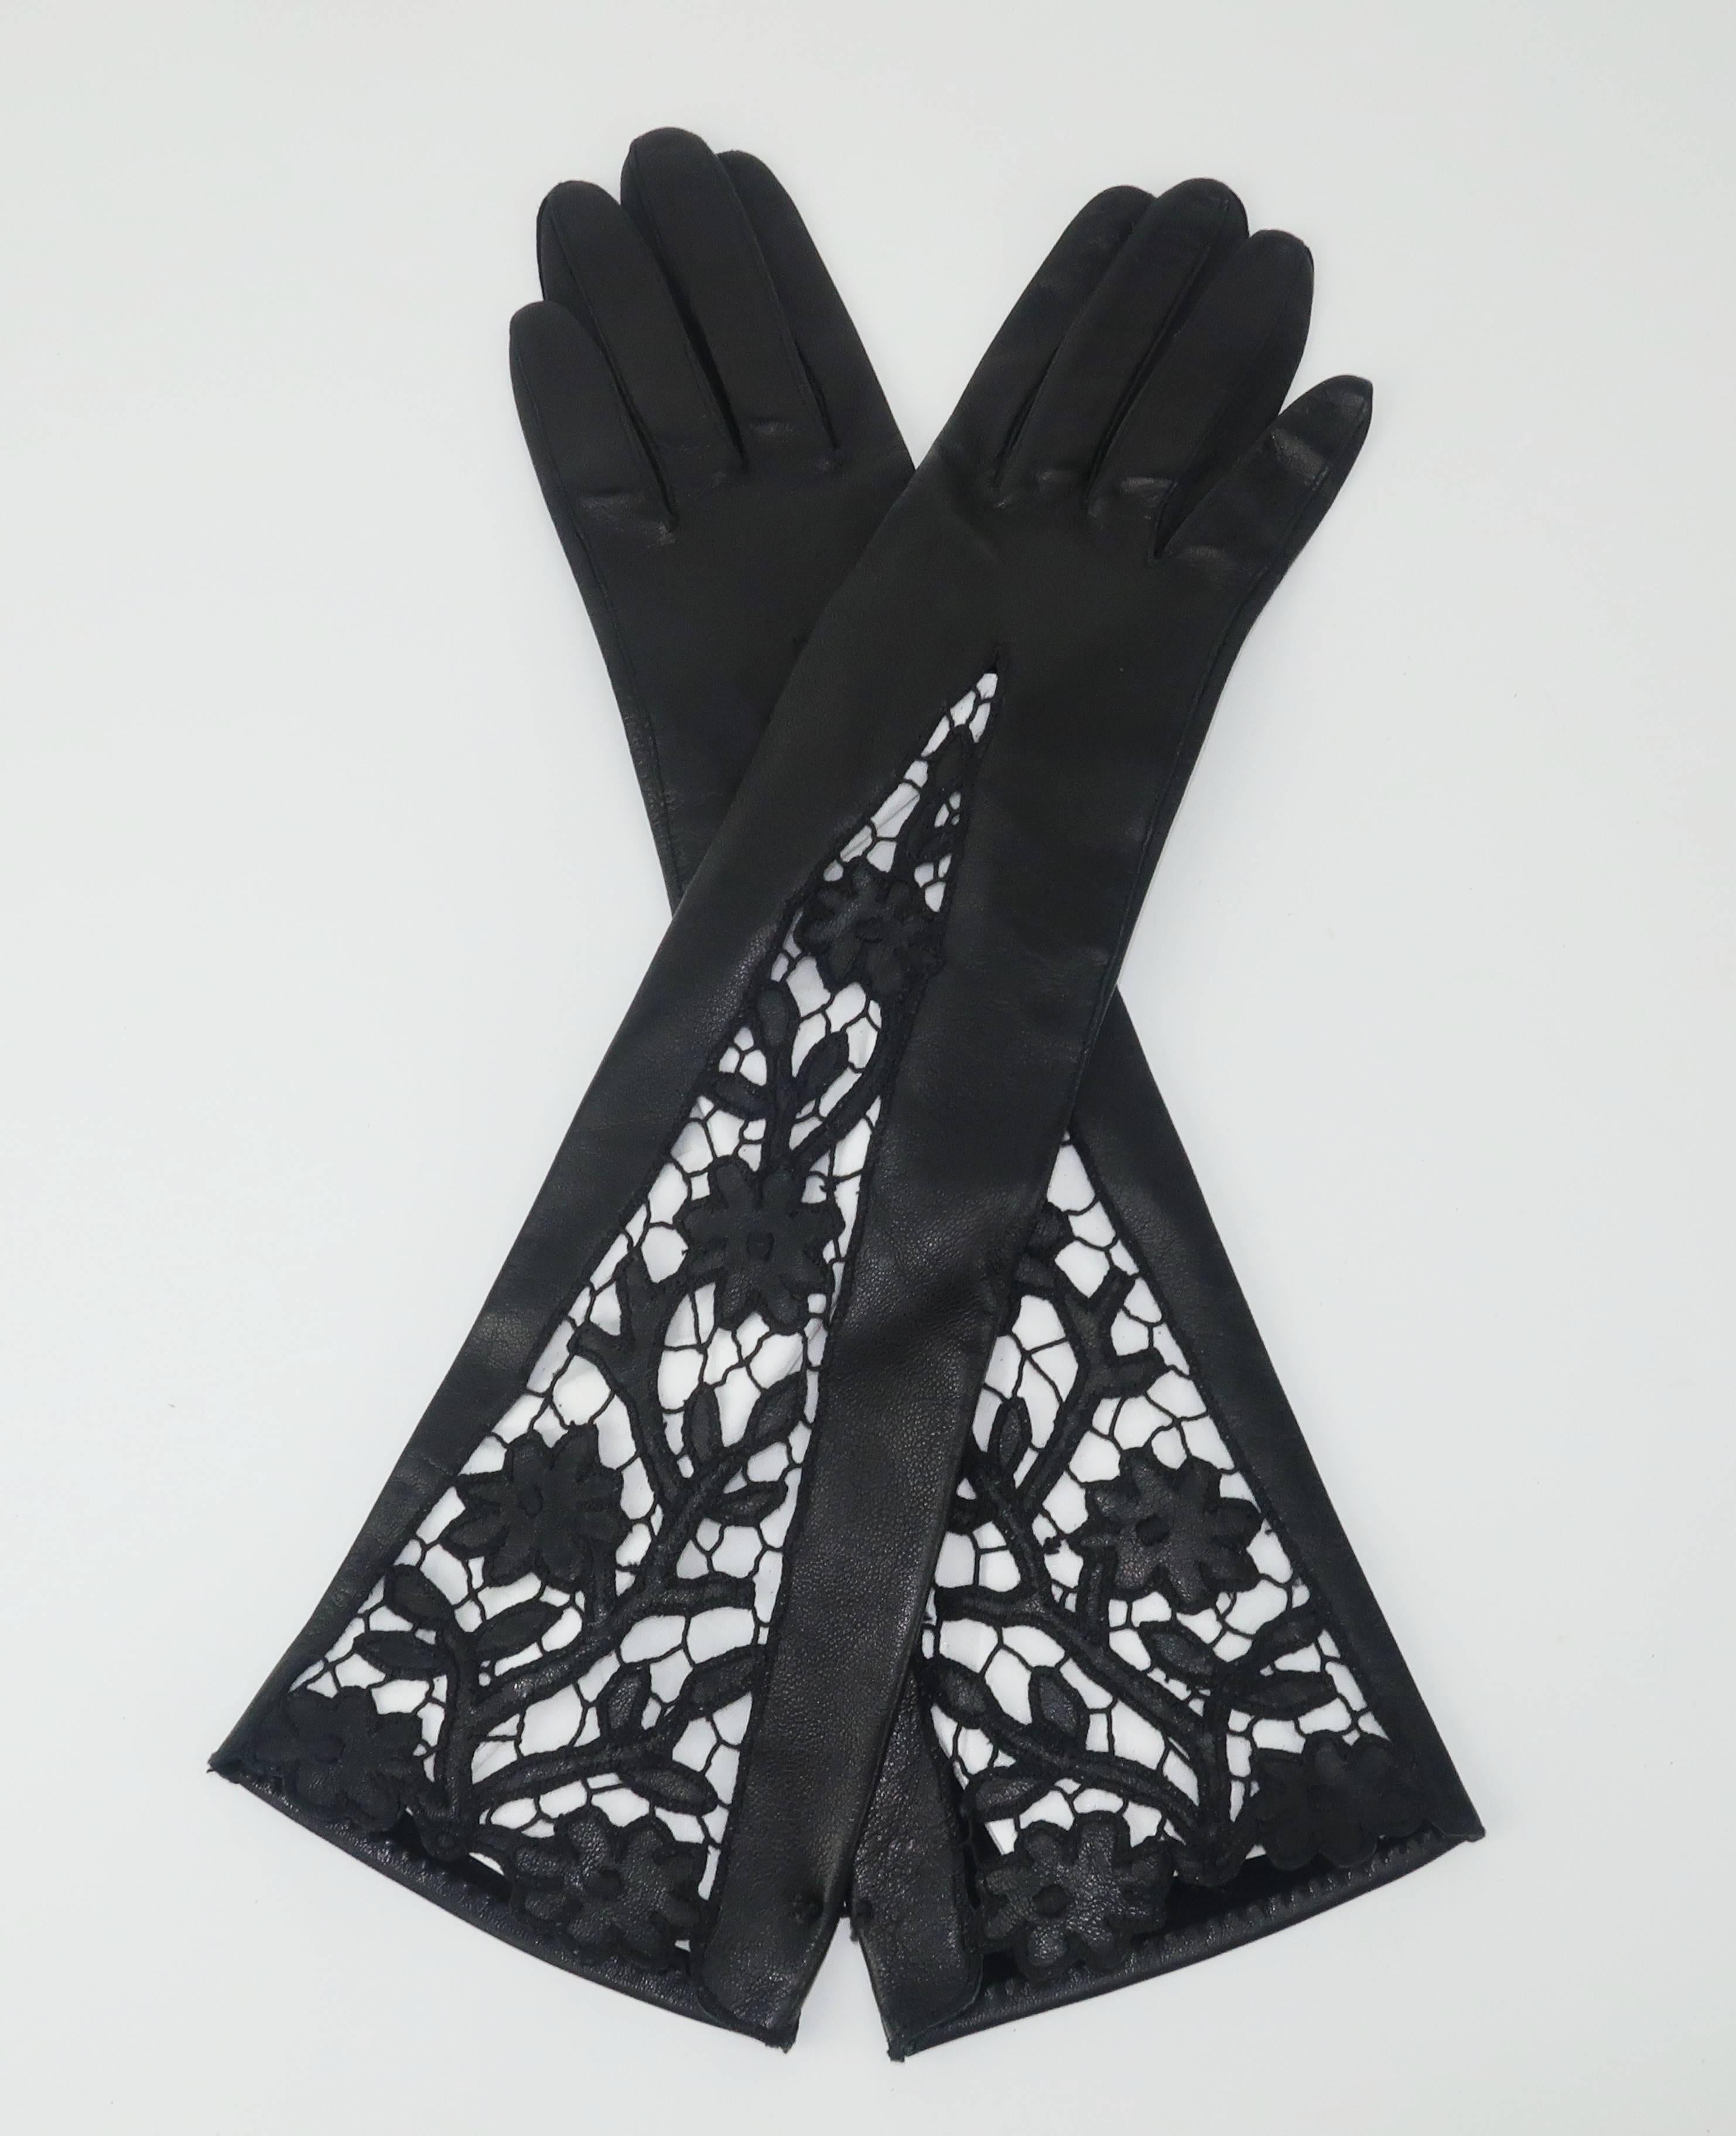 A beautiful pair of gloves is the ultimate in glamour and style. These black leather gloves are 3/4 length with intricate embroidered cut work at the cuff. Imagine pairing them with your favorite winter coat or a fabulous cocktail ensemble. 